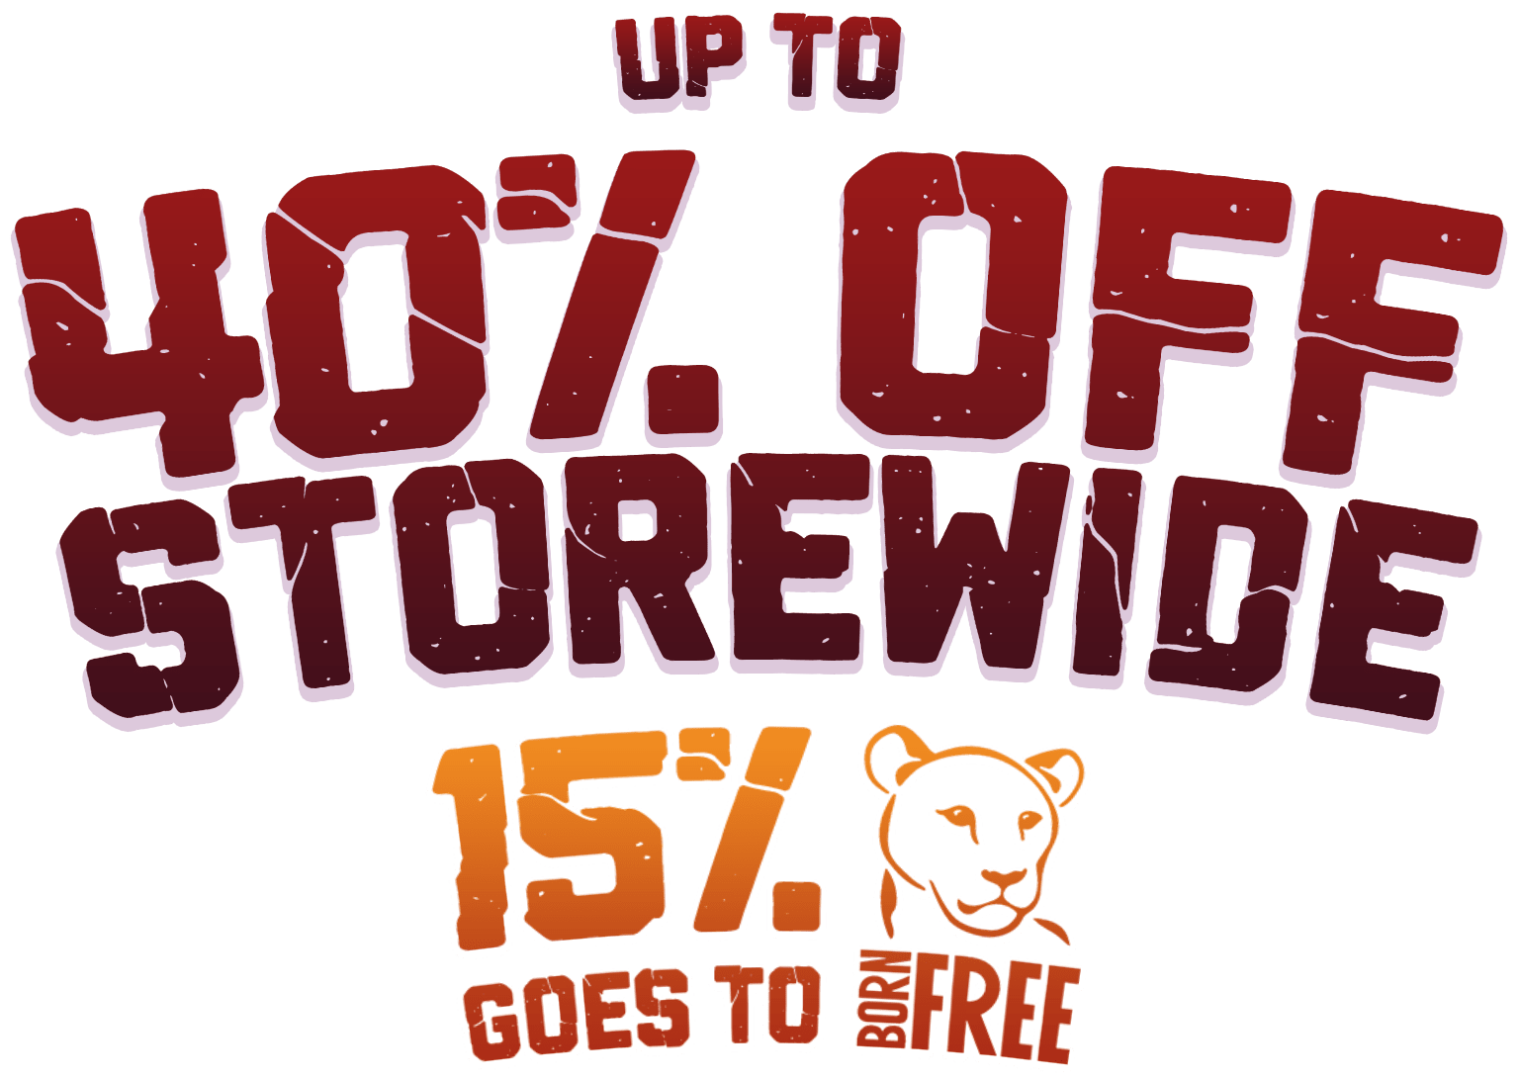 Up to 40% off storewide! 15% goes to Born Free